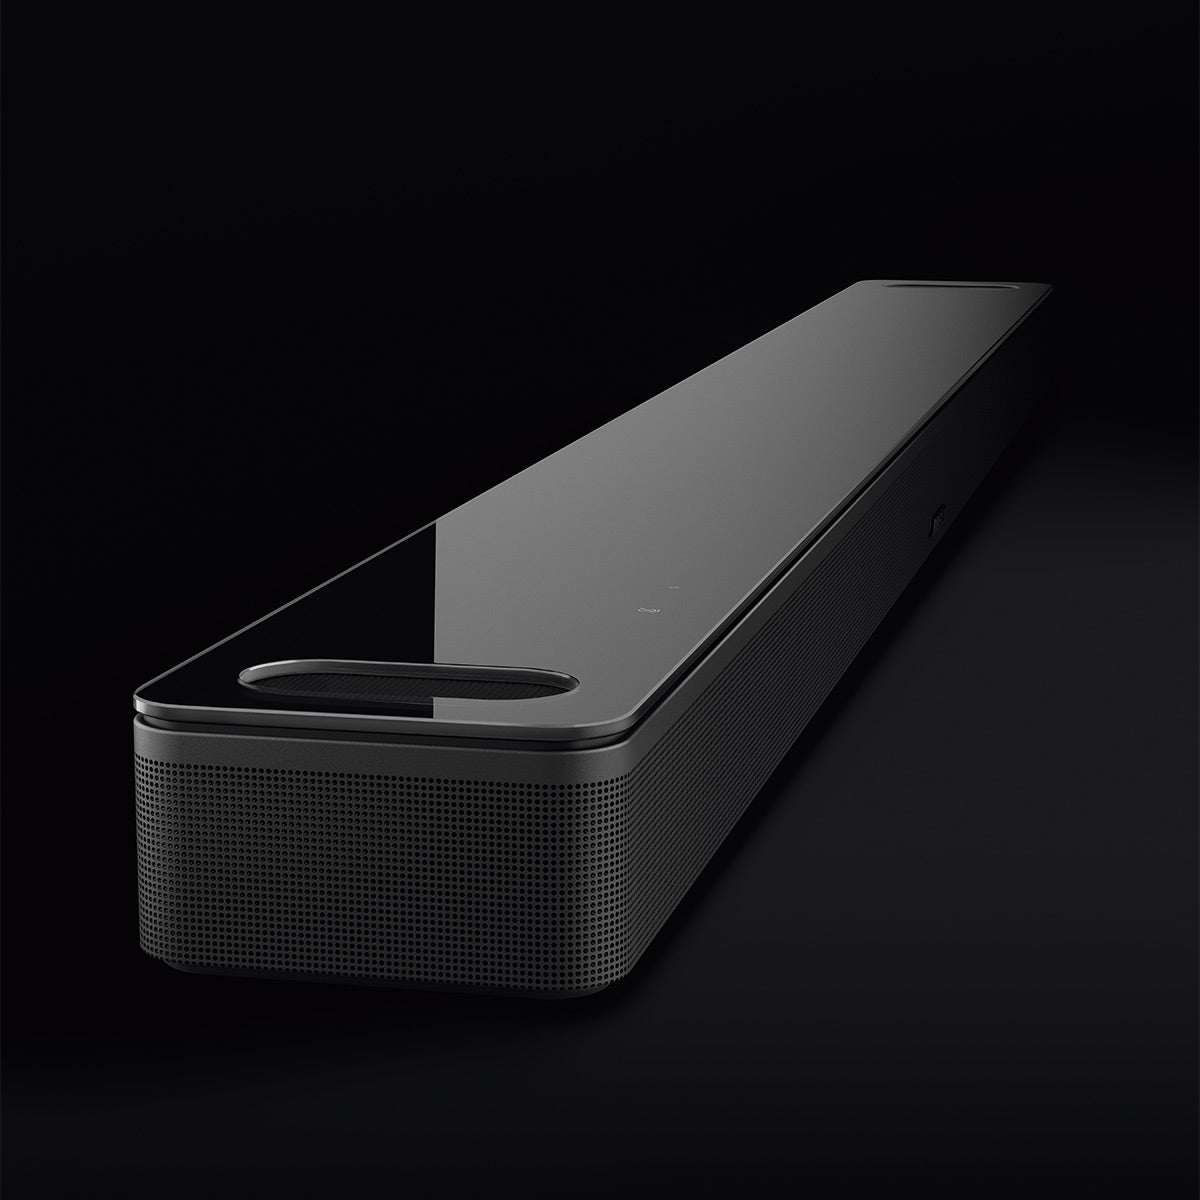 Bose Smart Ultra Soundbar with Dolby Atmos and Voice Control (Black)